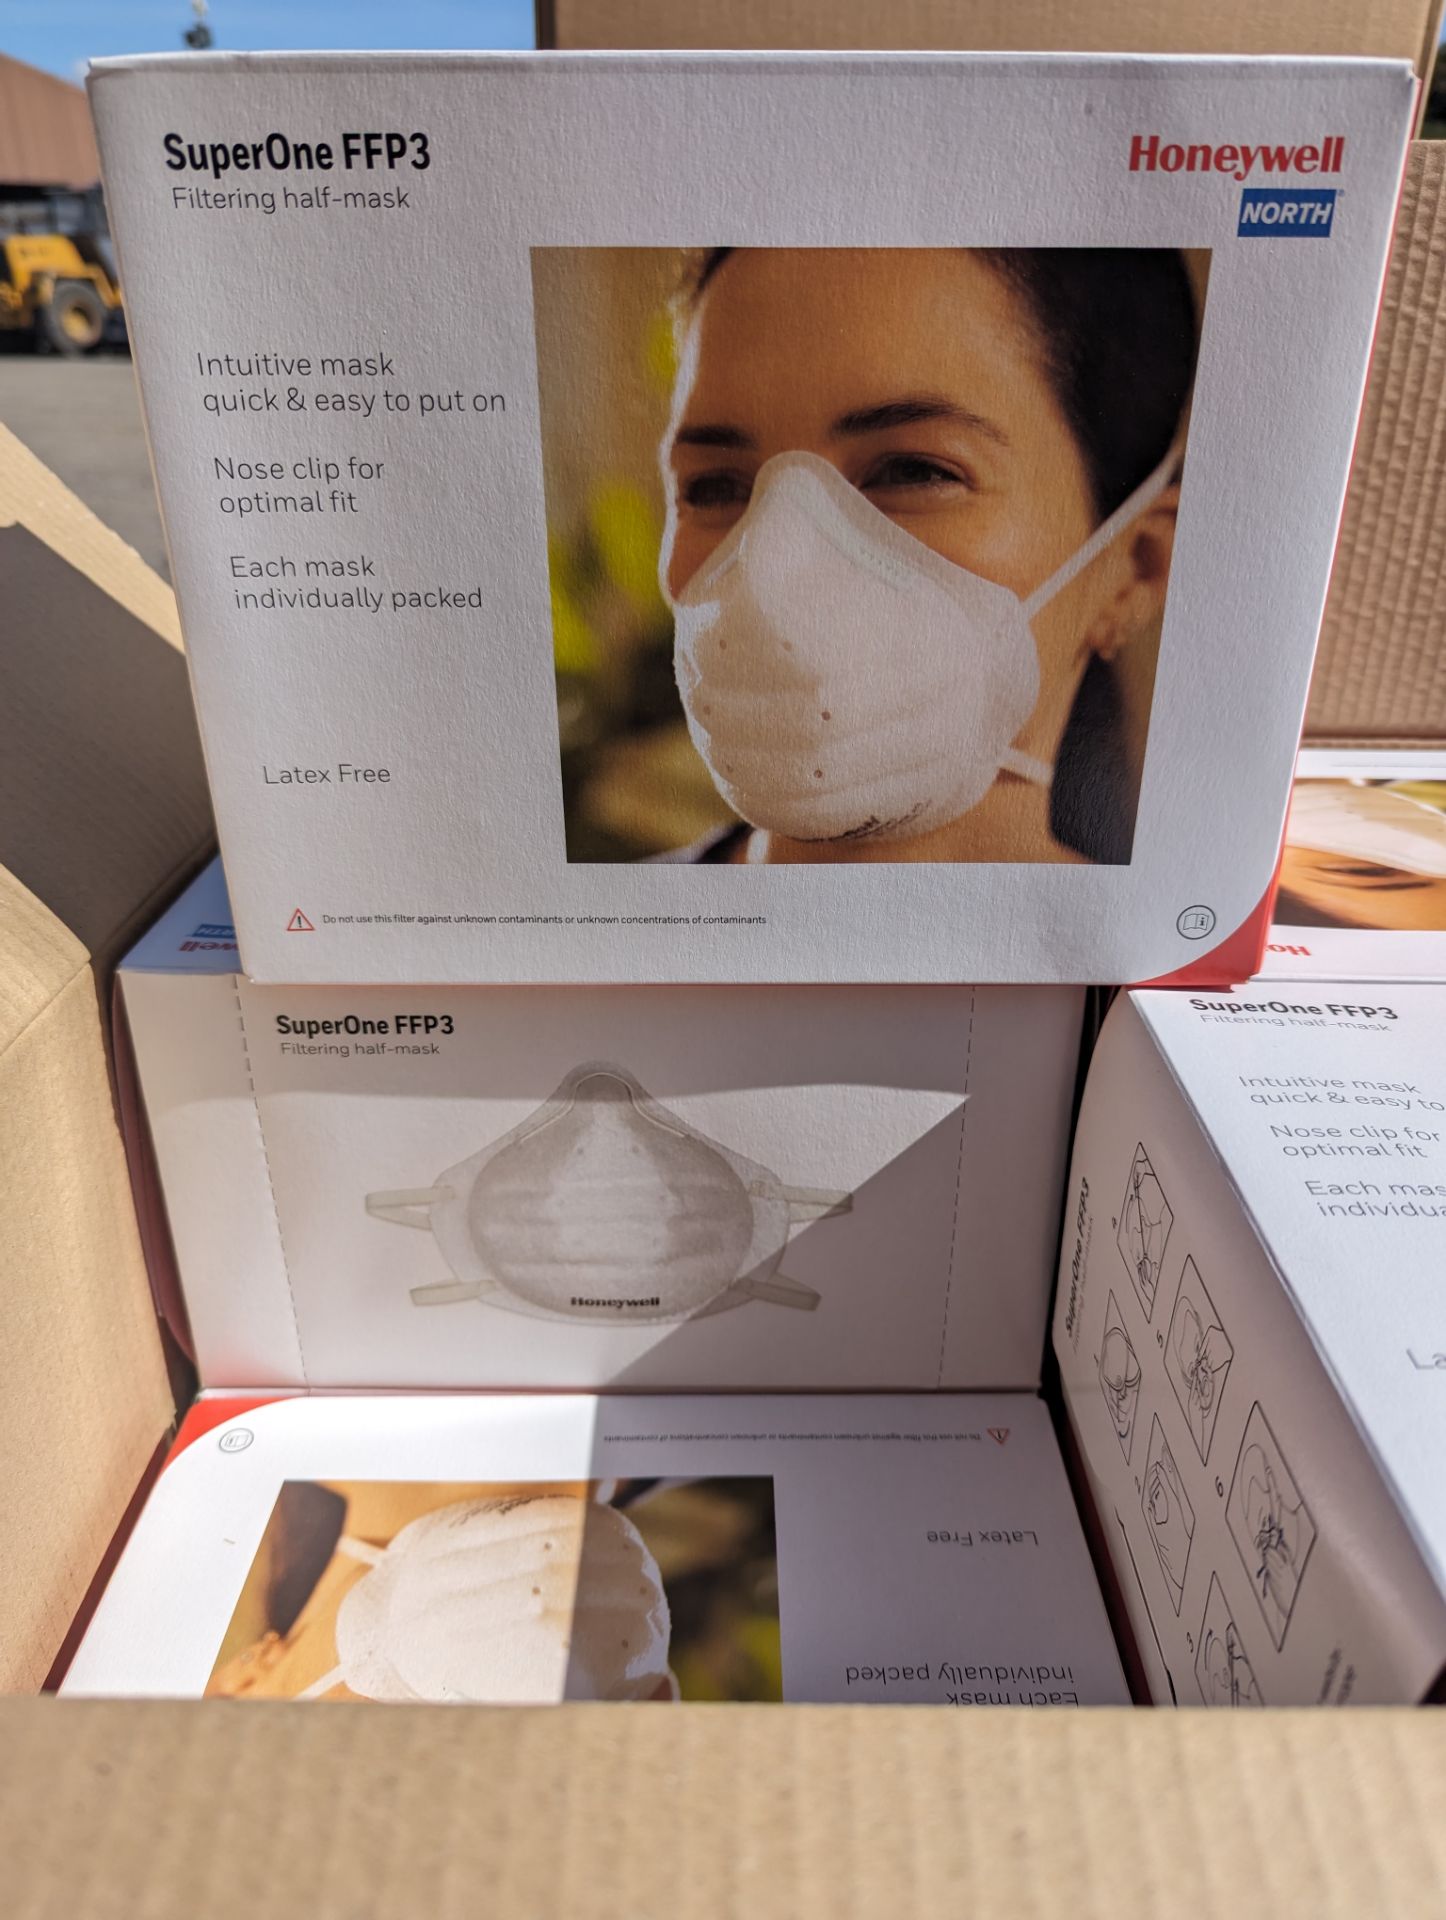 4x Boxes Honeywell SuperOne V2 ip2 FFP3 Half Mask Filter, 12 Packs of 16 Units Each Per Box - Image 6 of 6